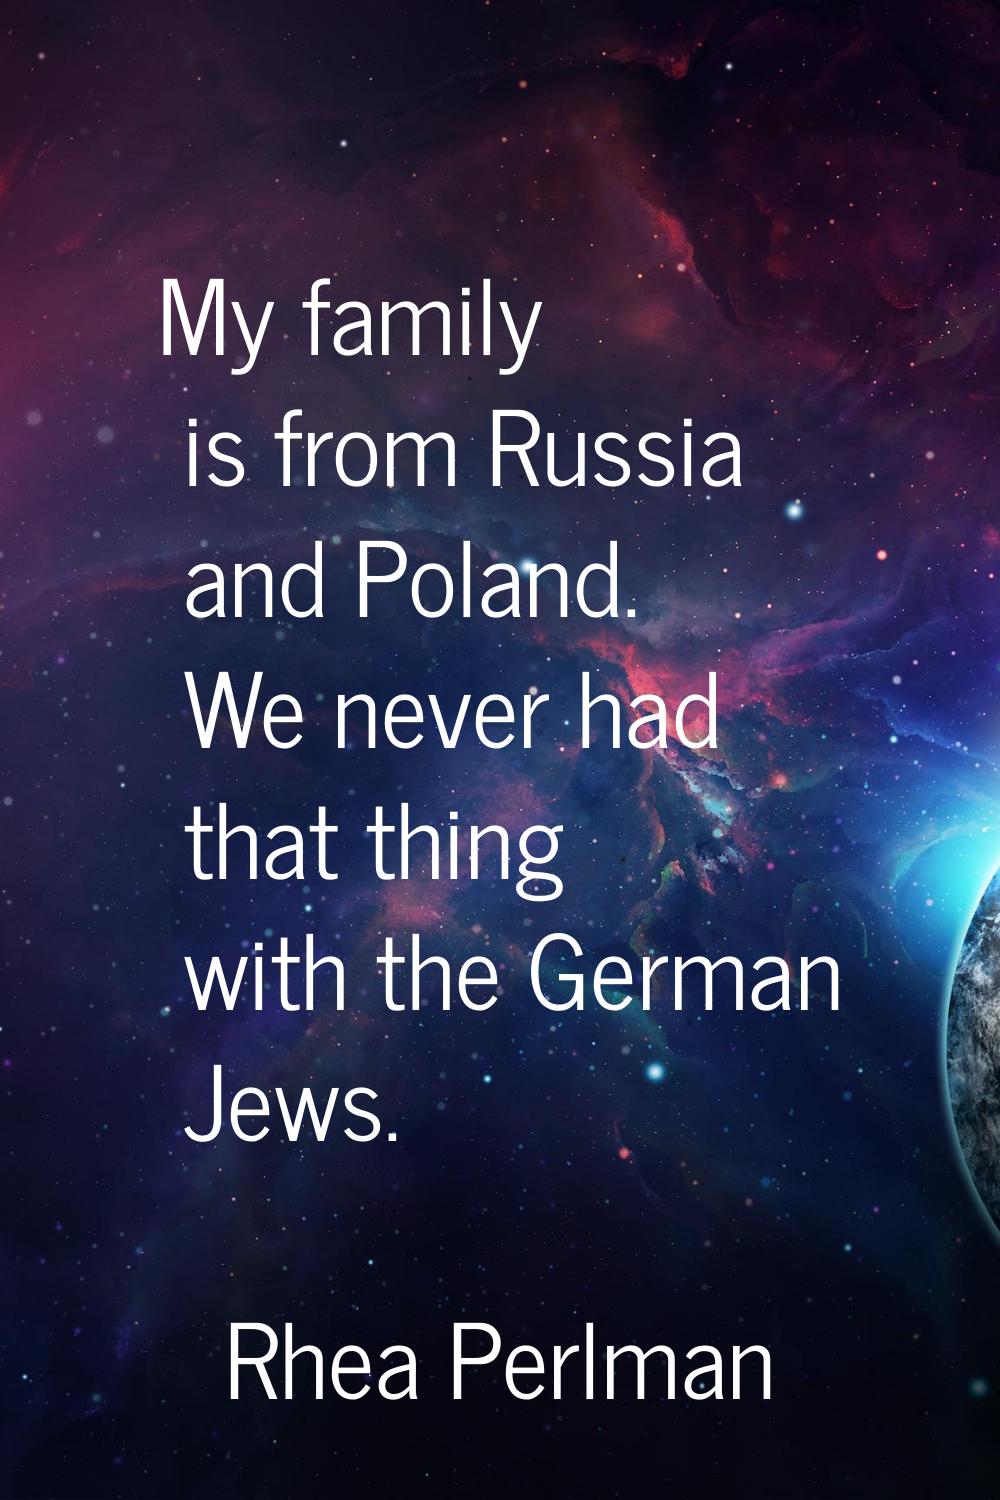 My family is from Russia and Poland. We never had that thing with the German Jews.